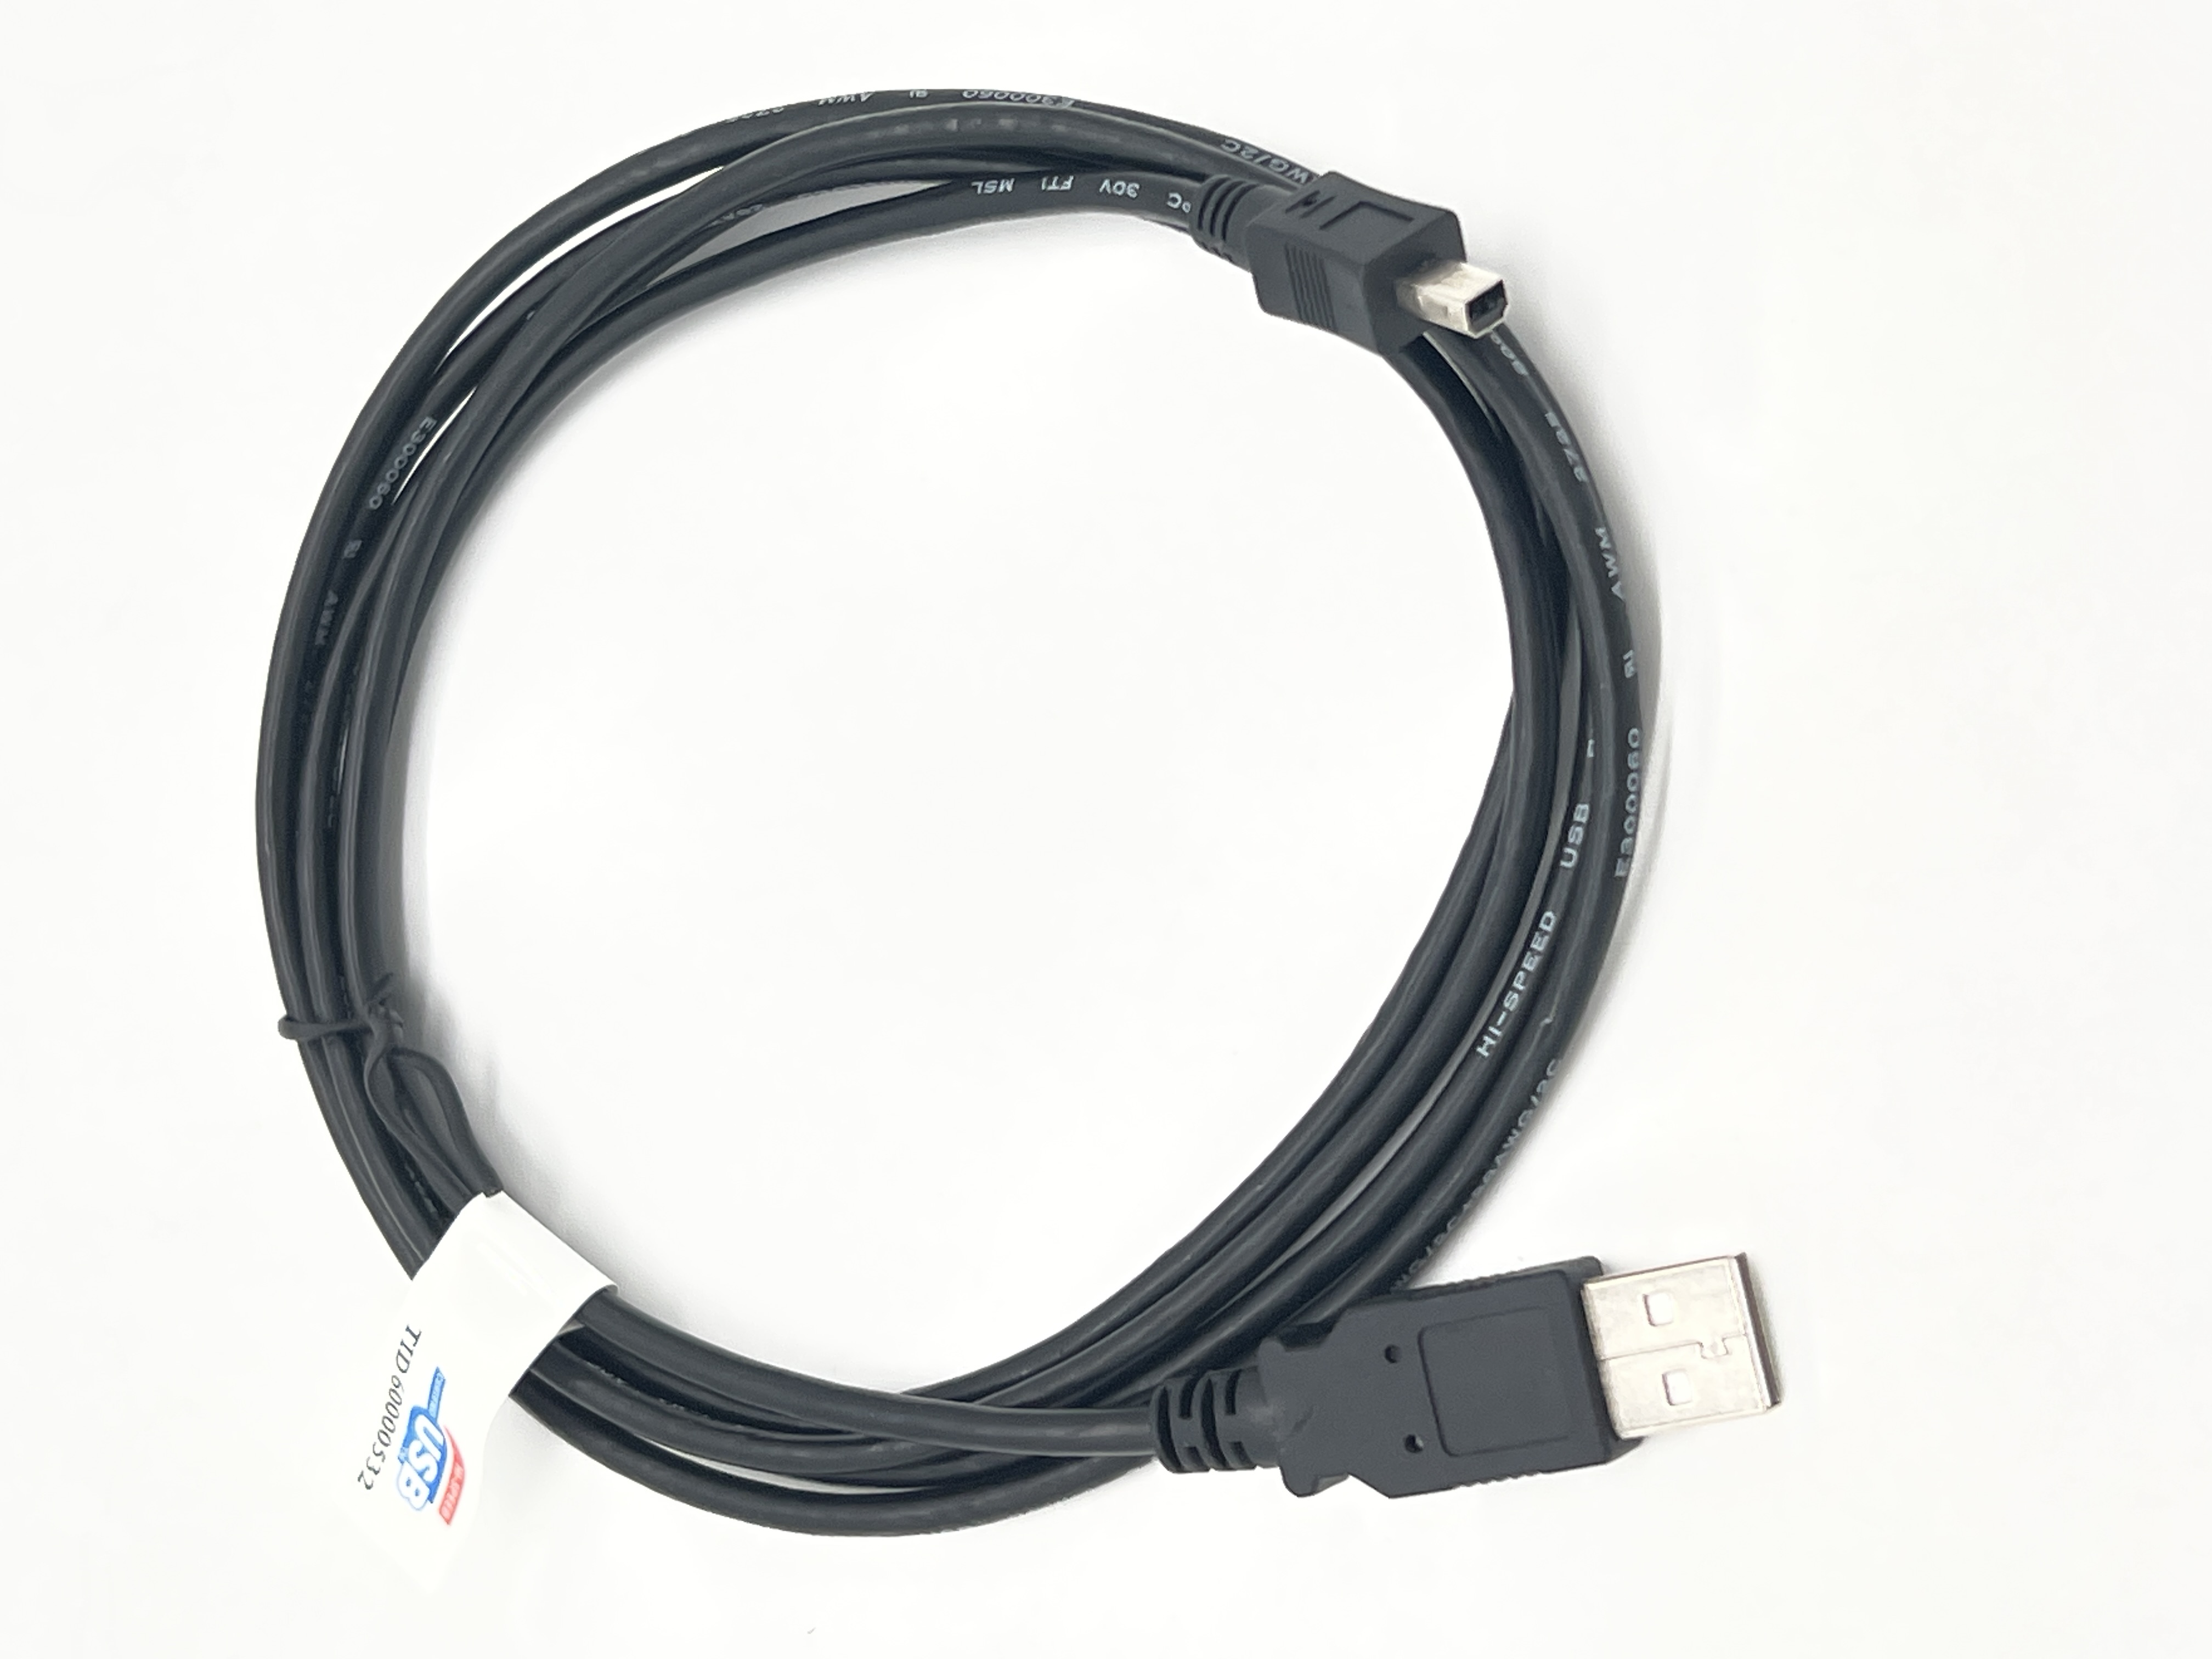 USB Camera Cable 4-Wire EPSON D4 6FT